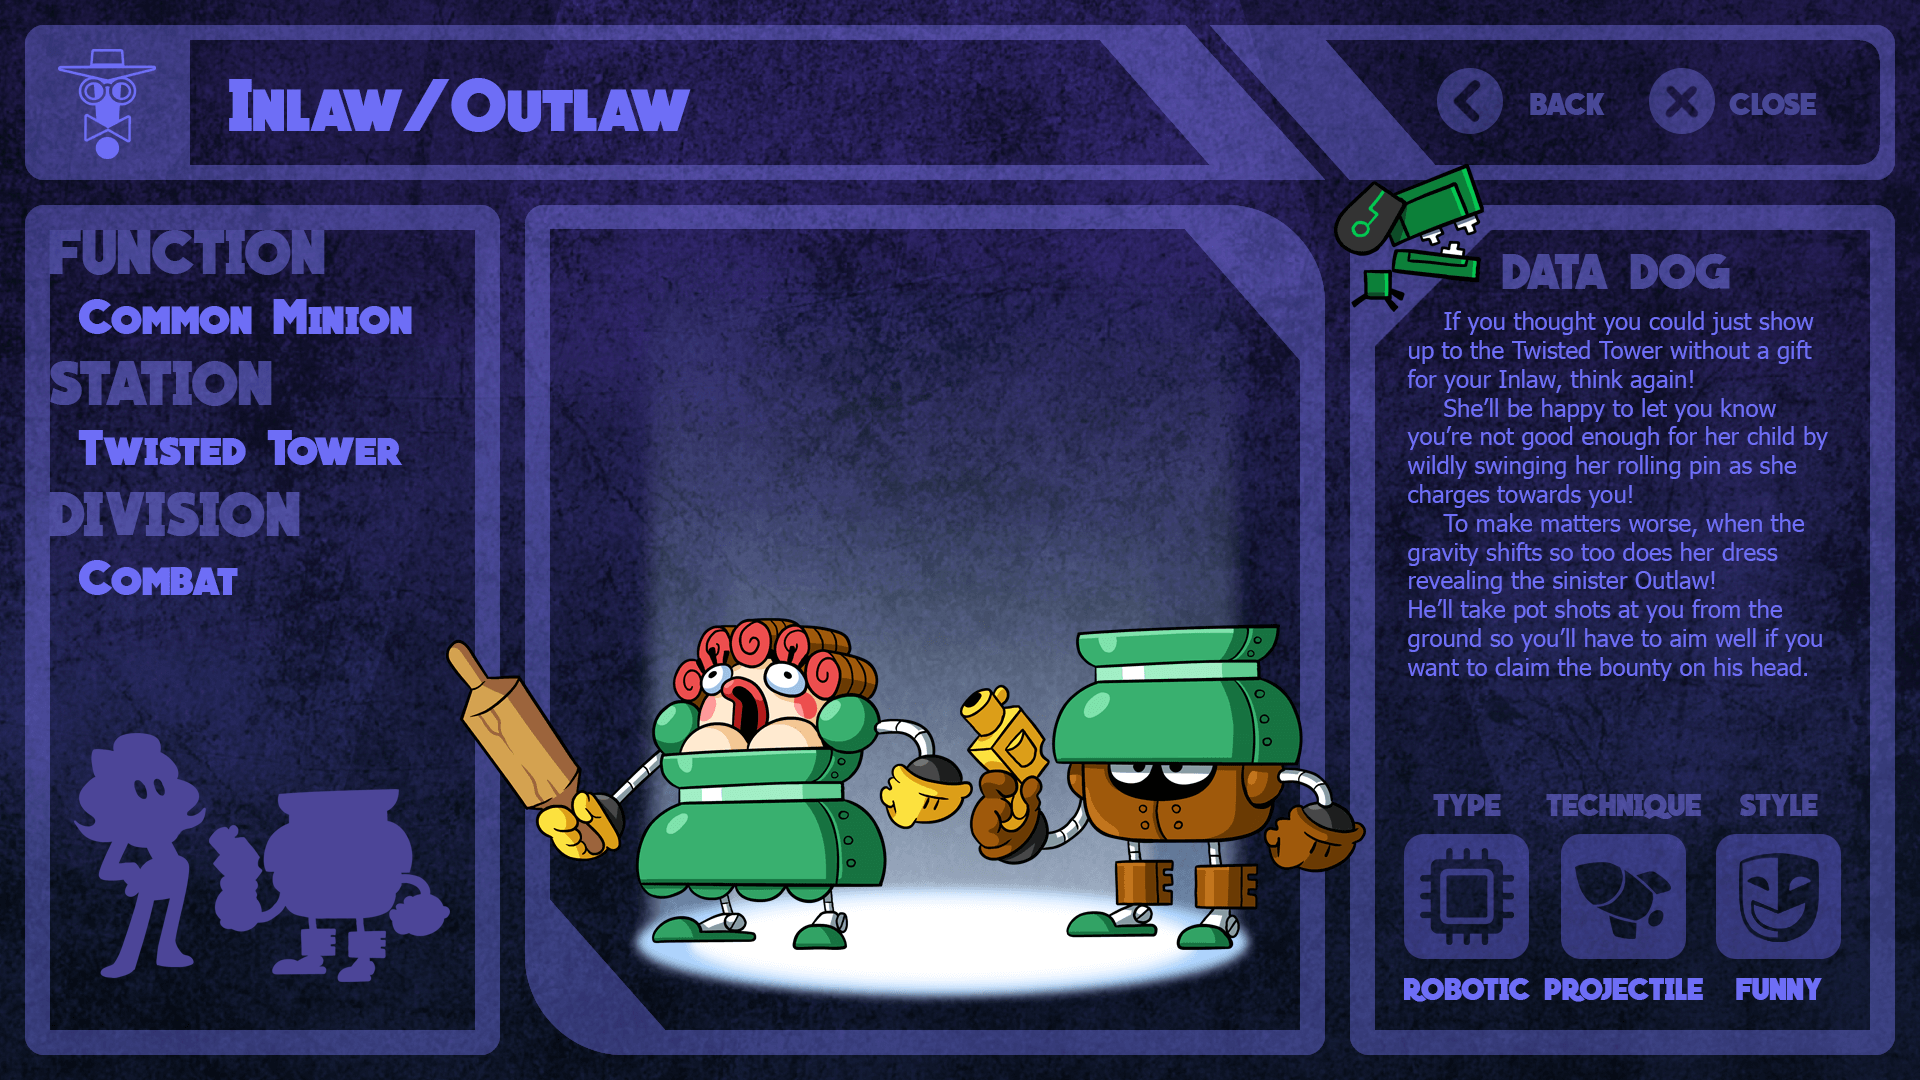 INLAW/OUTLAW